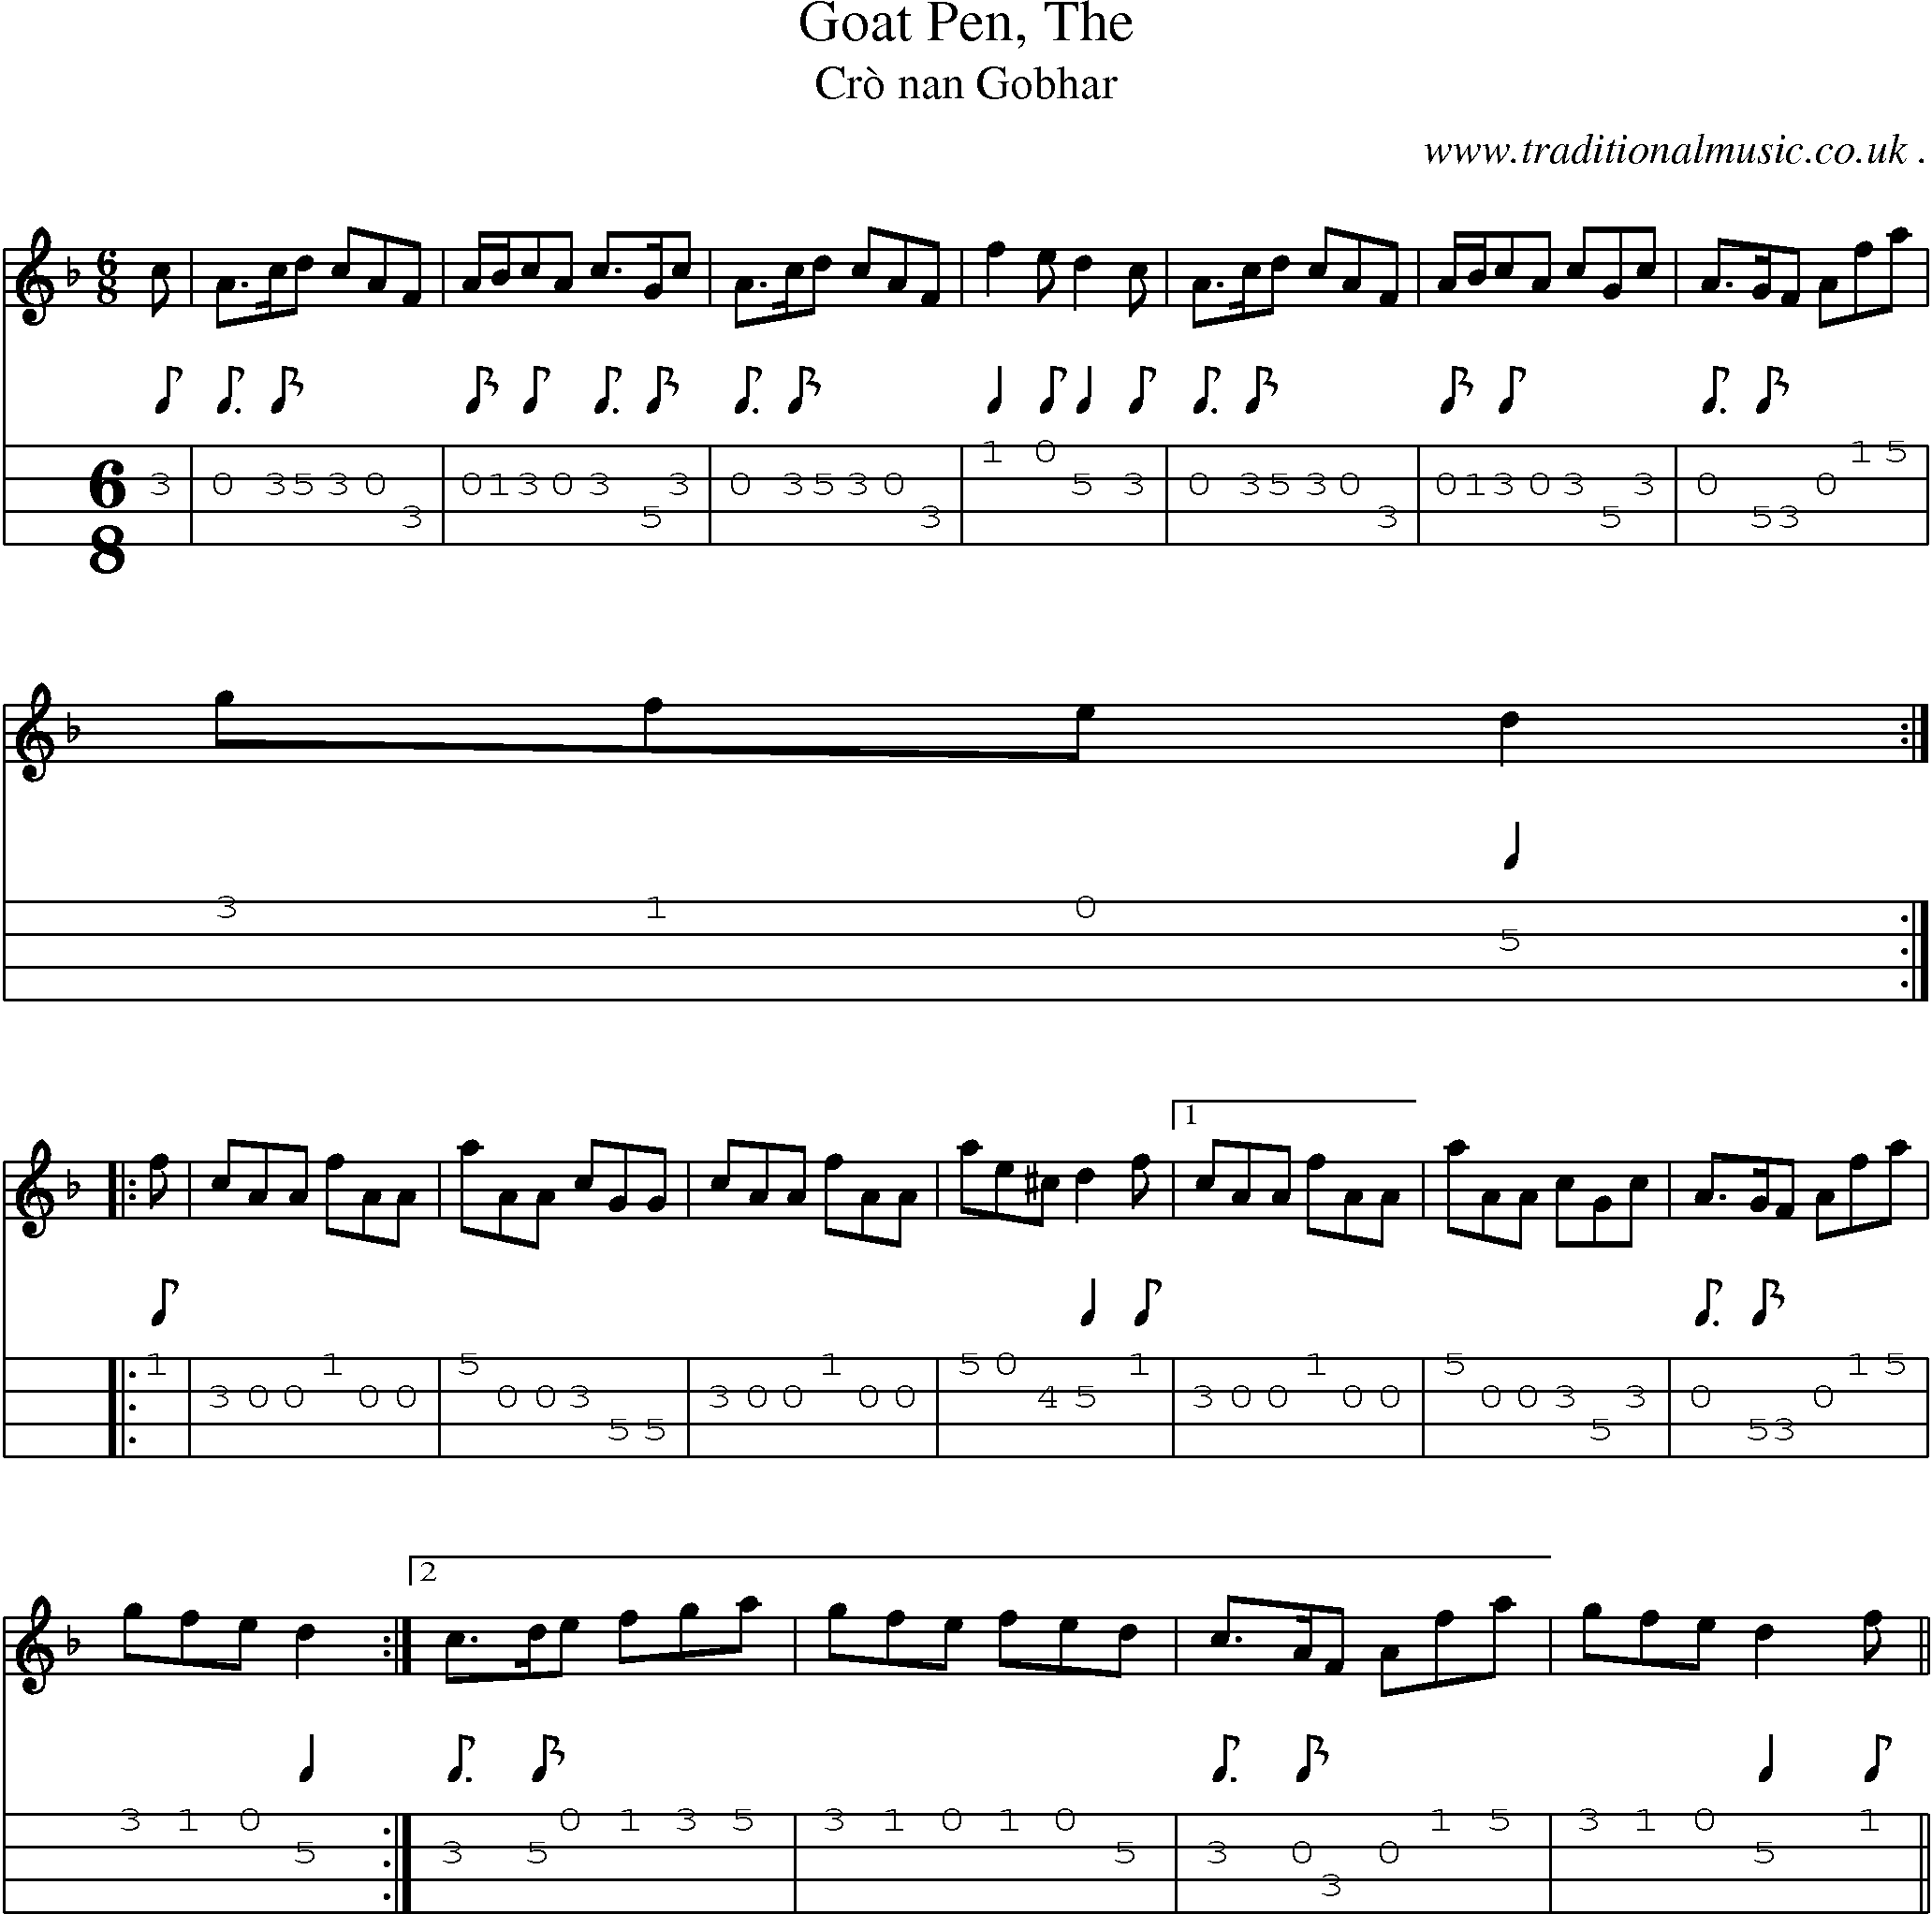 Sheet-music  score, Chords and Mandolin Tabs for Goat Pen The